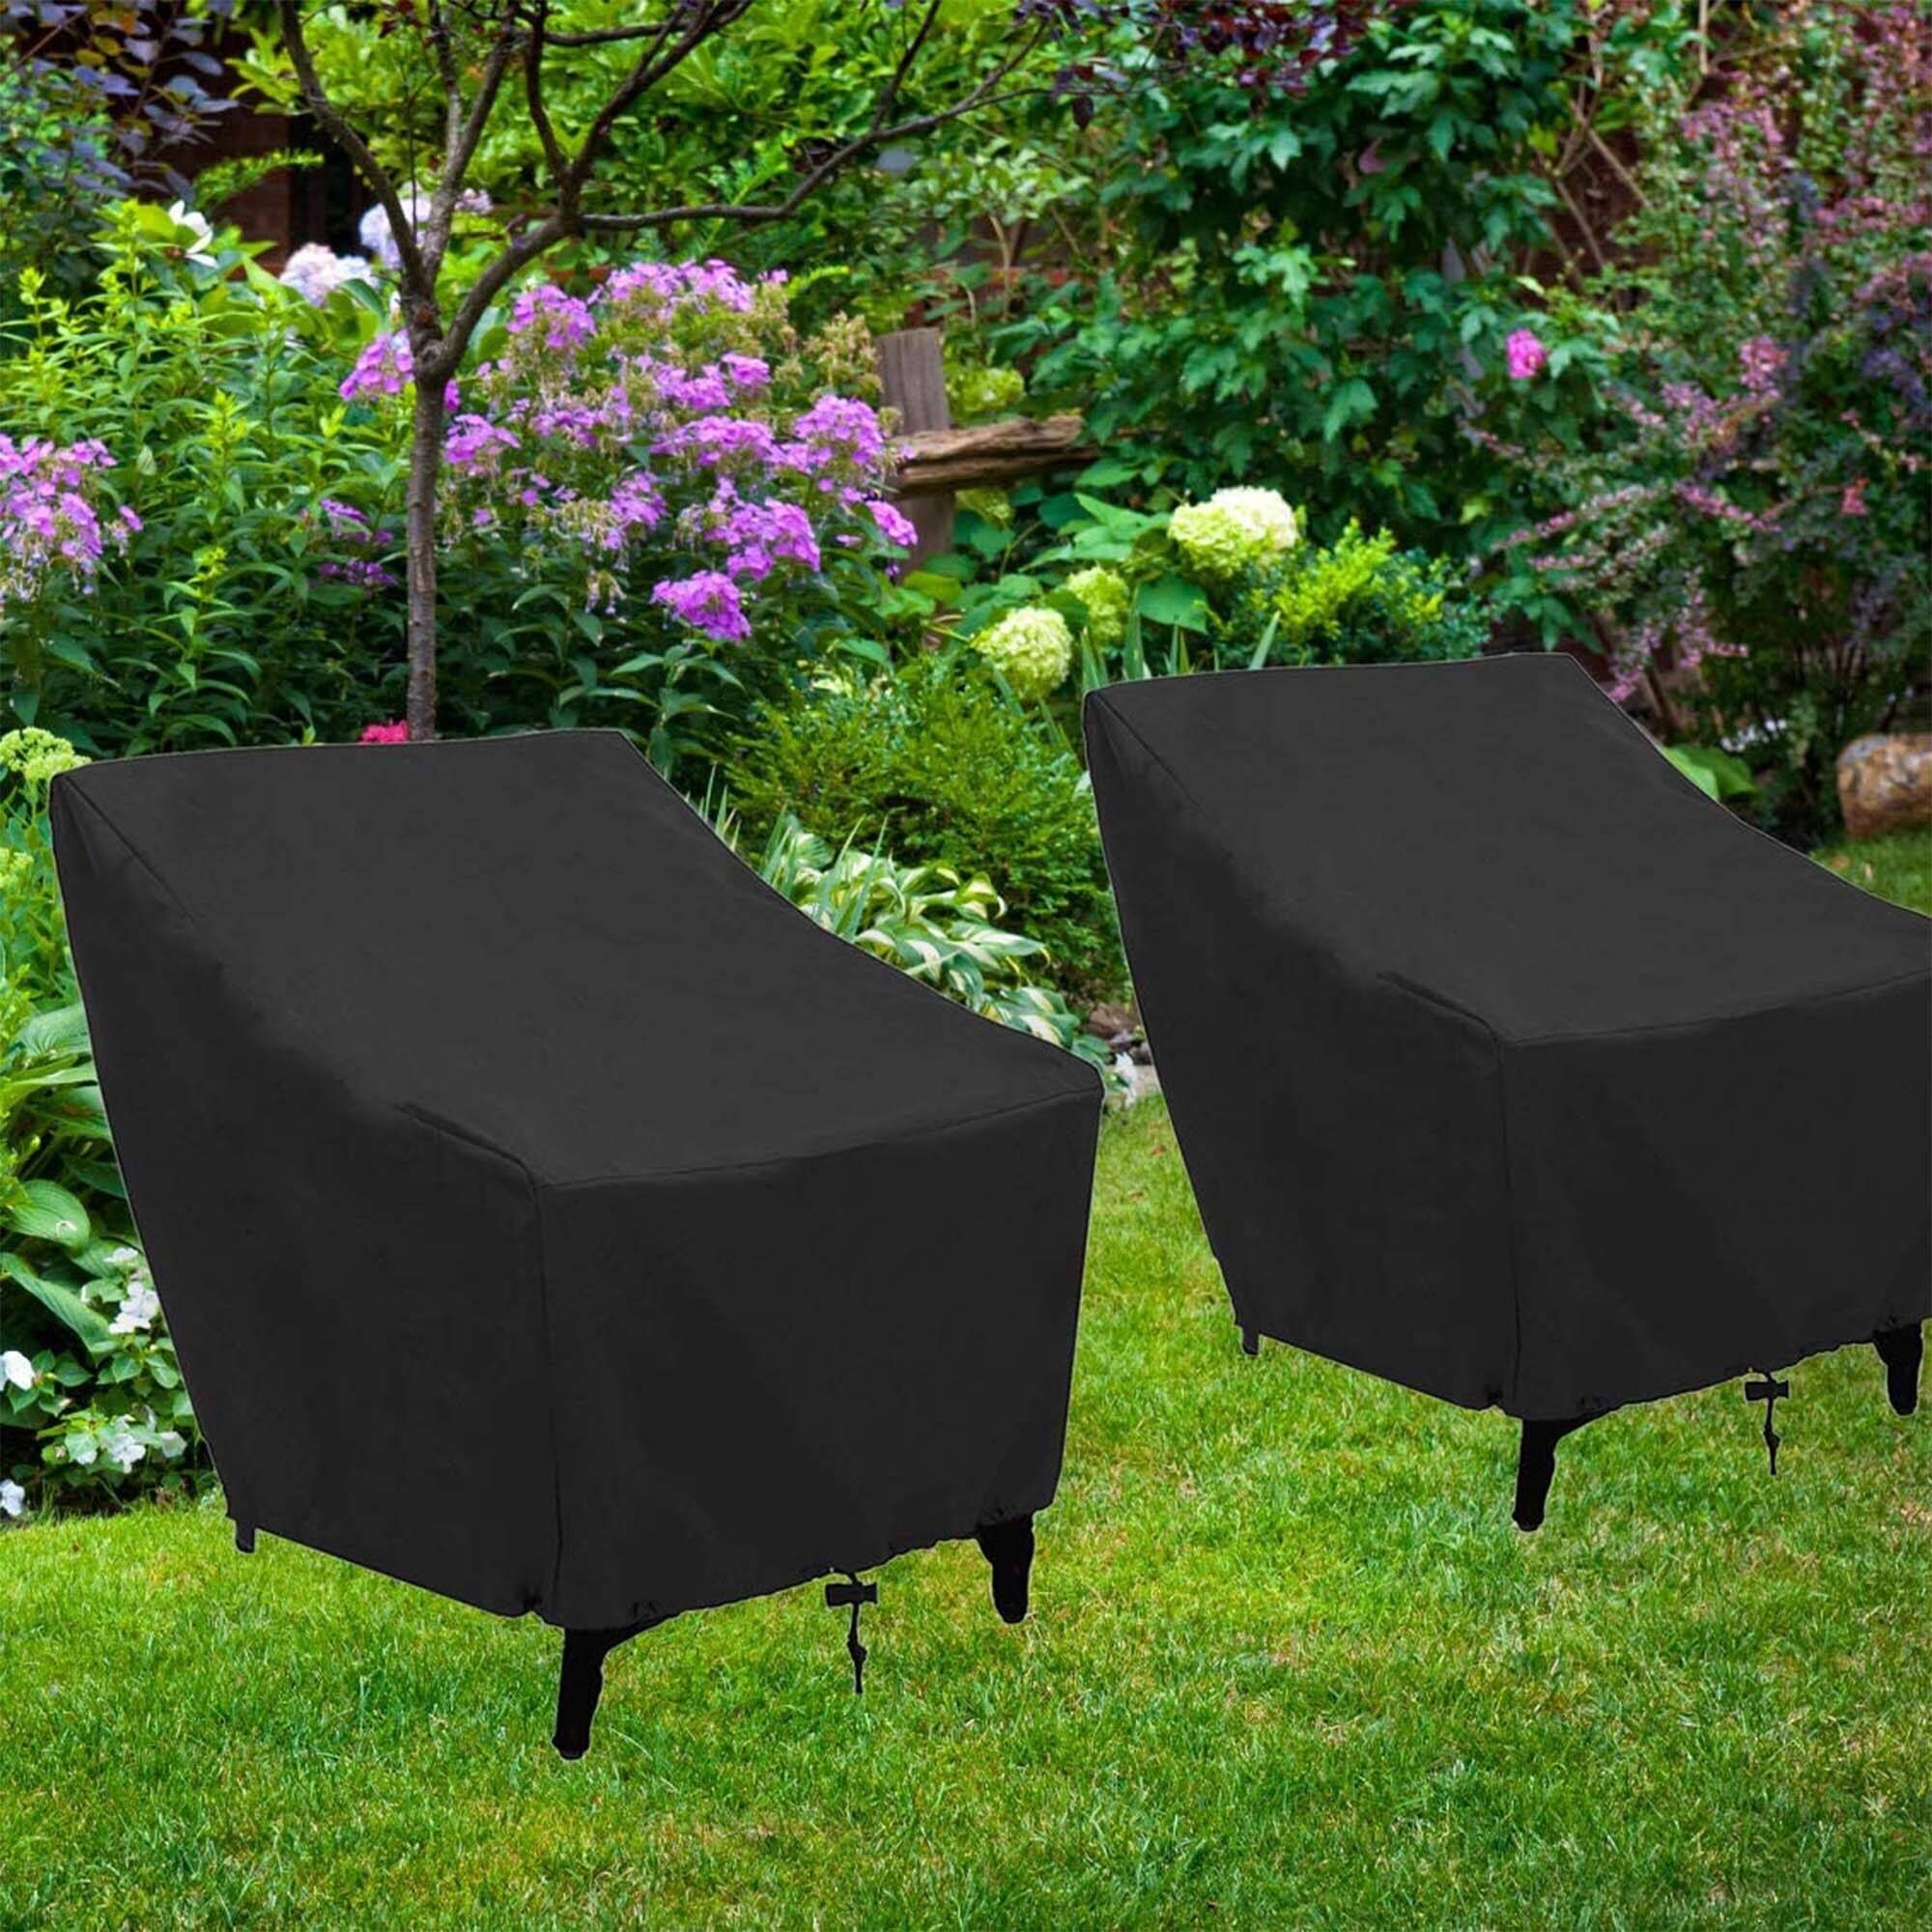 New Strong Stacking Chairs Cover Garden Black Waterproof Stacking Chair Cover 